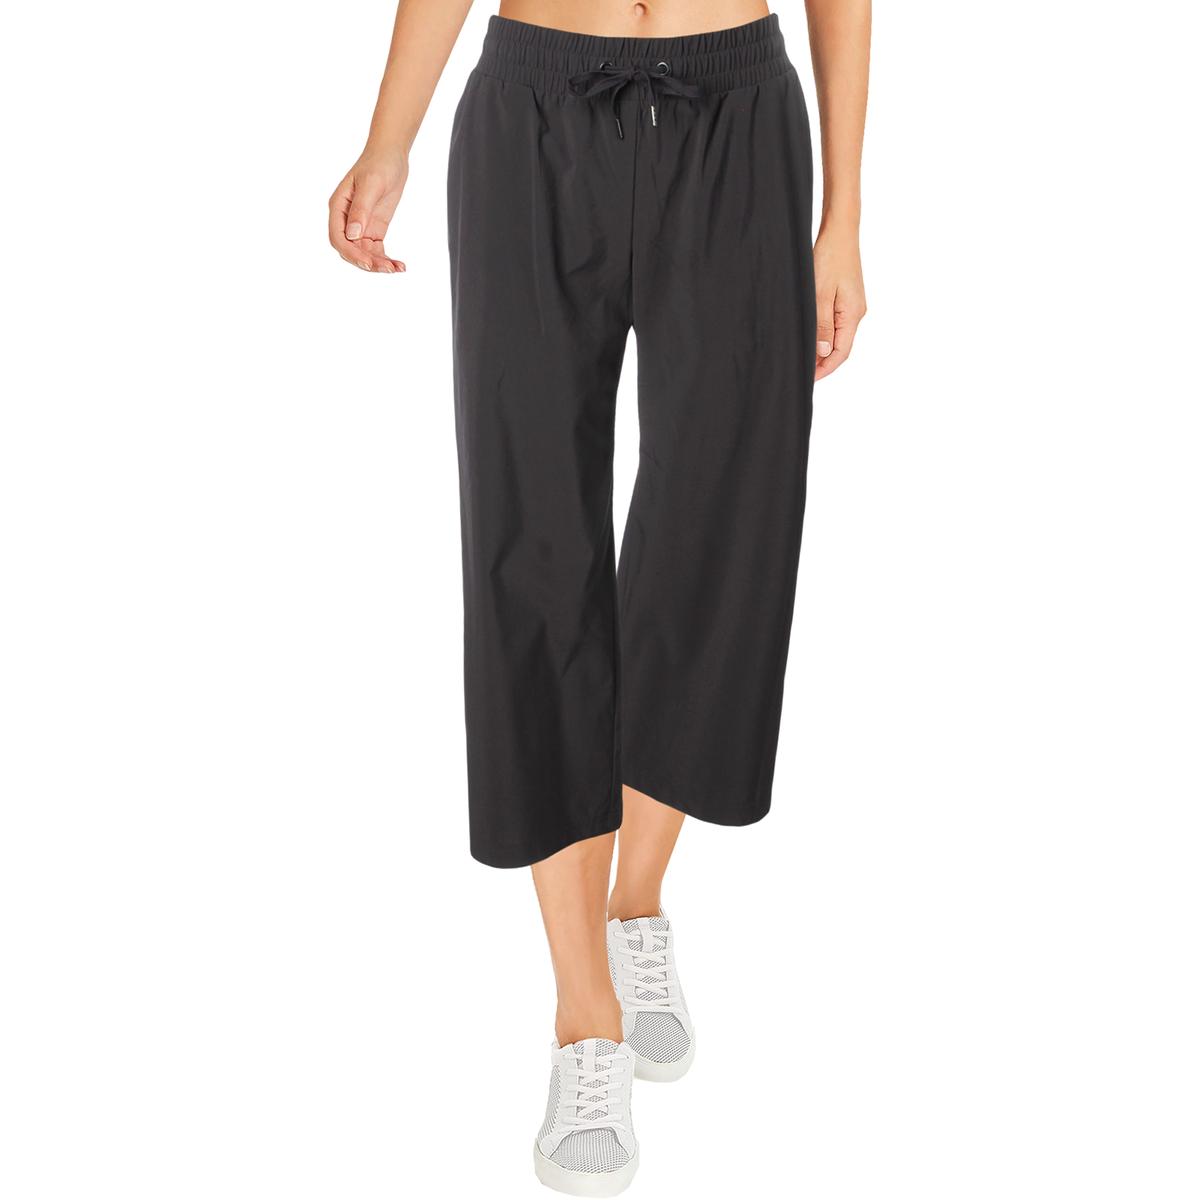 Ideology Womens Gray Fitness Activewear Workout Pants Athletic XL BHFO ...